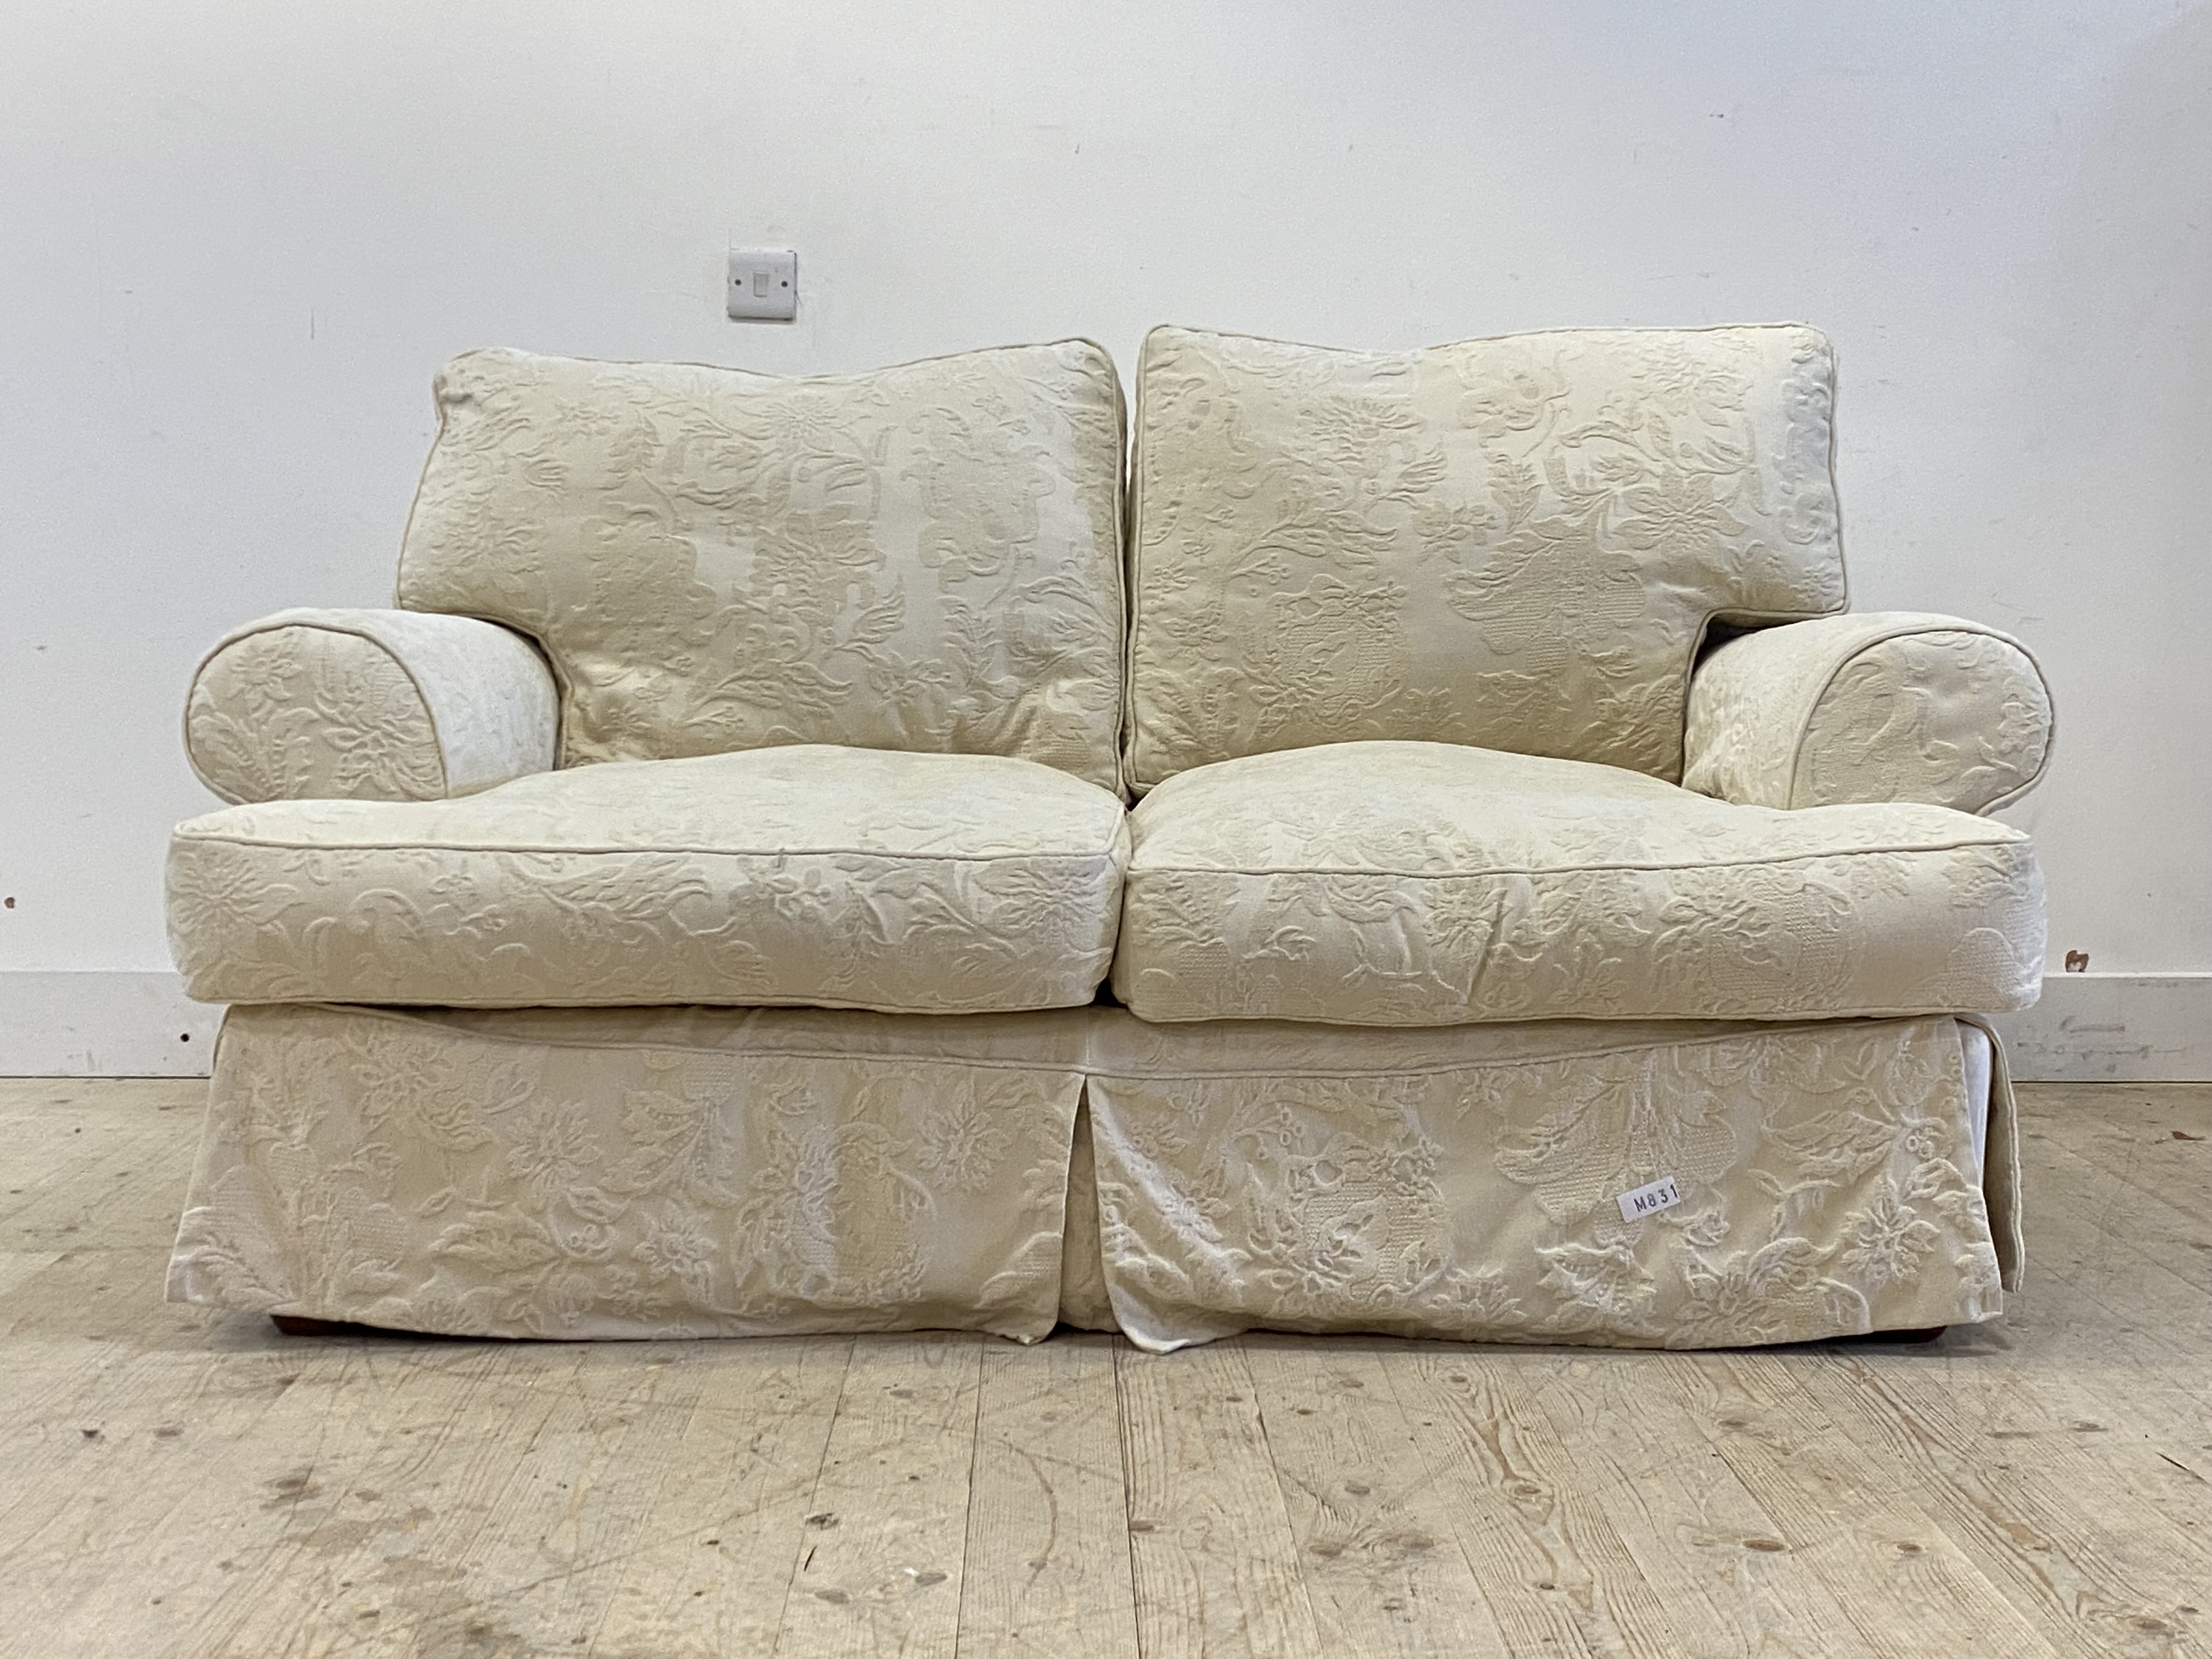 A traditional two seat sofa, upholstered in a fitted white demask cover, raised on turned bun